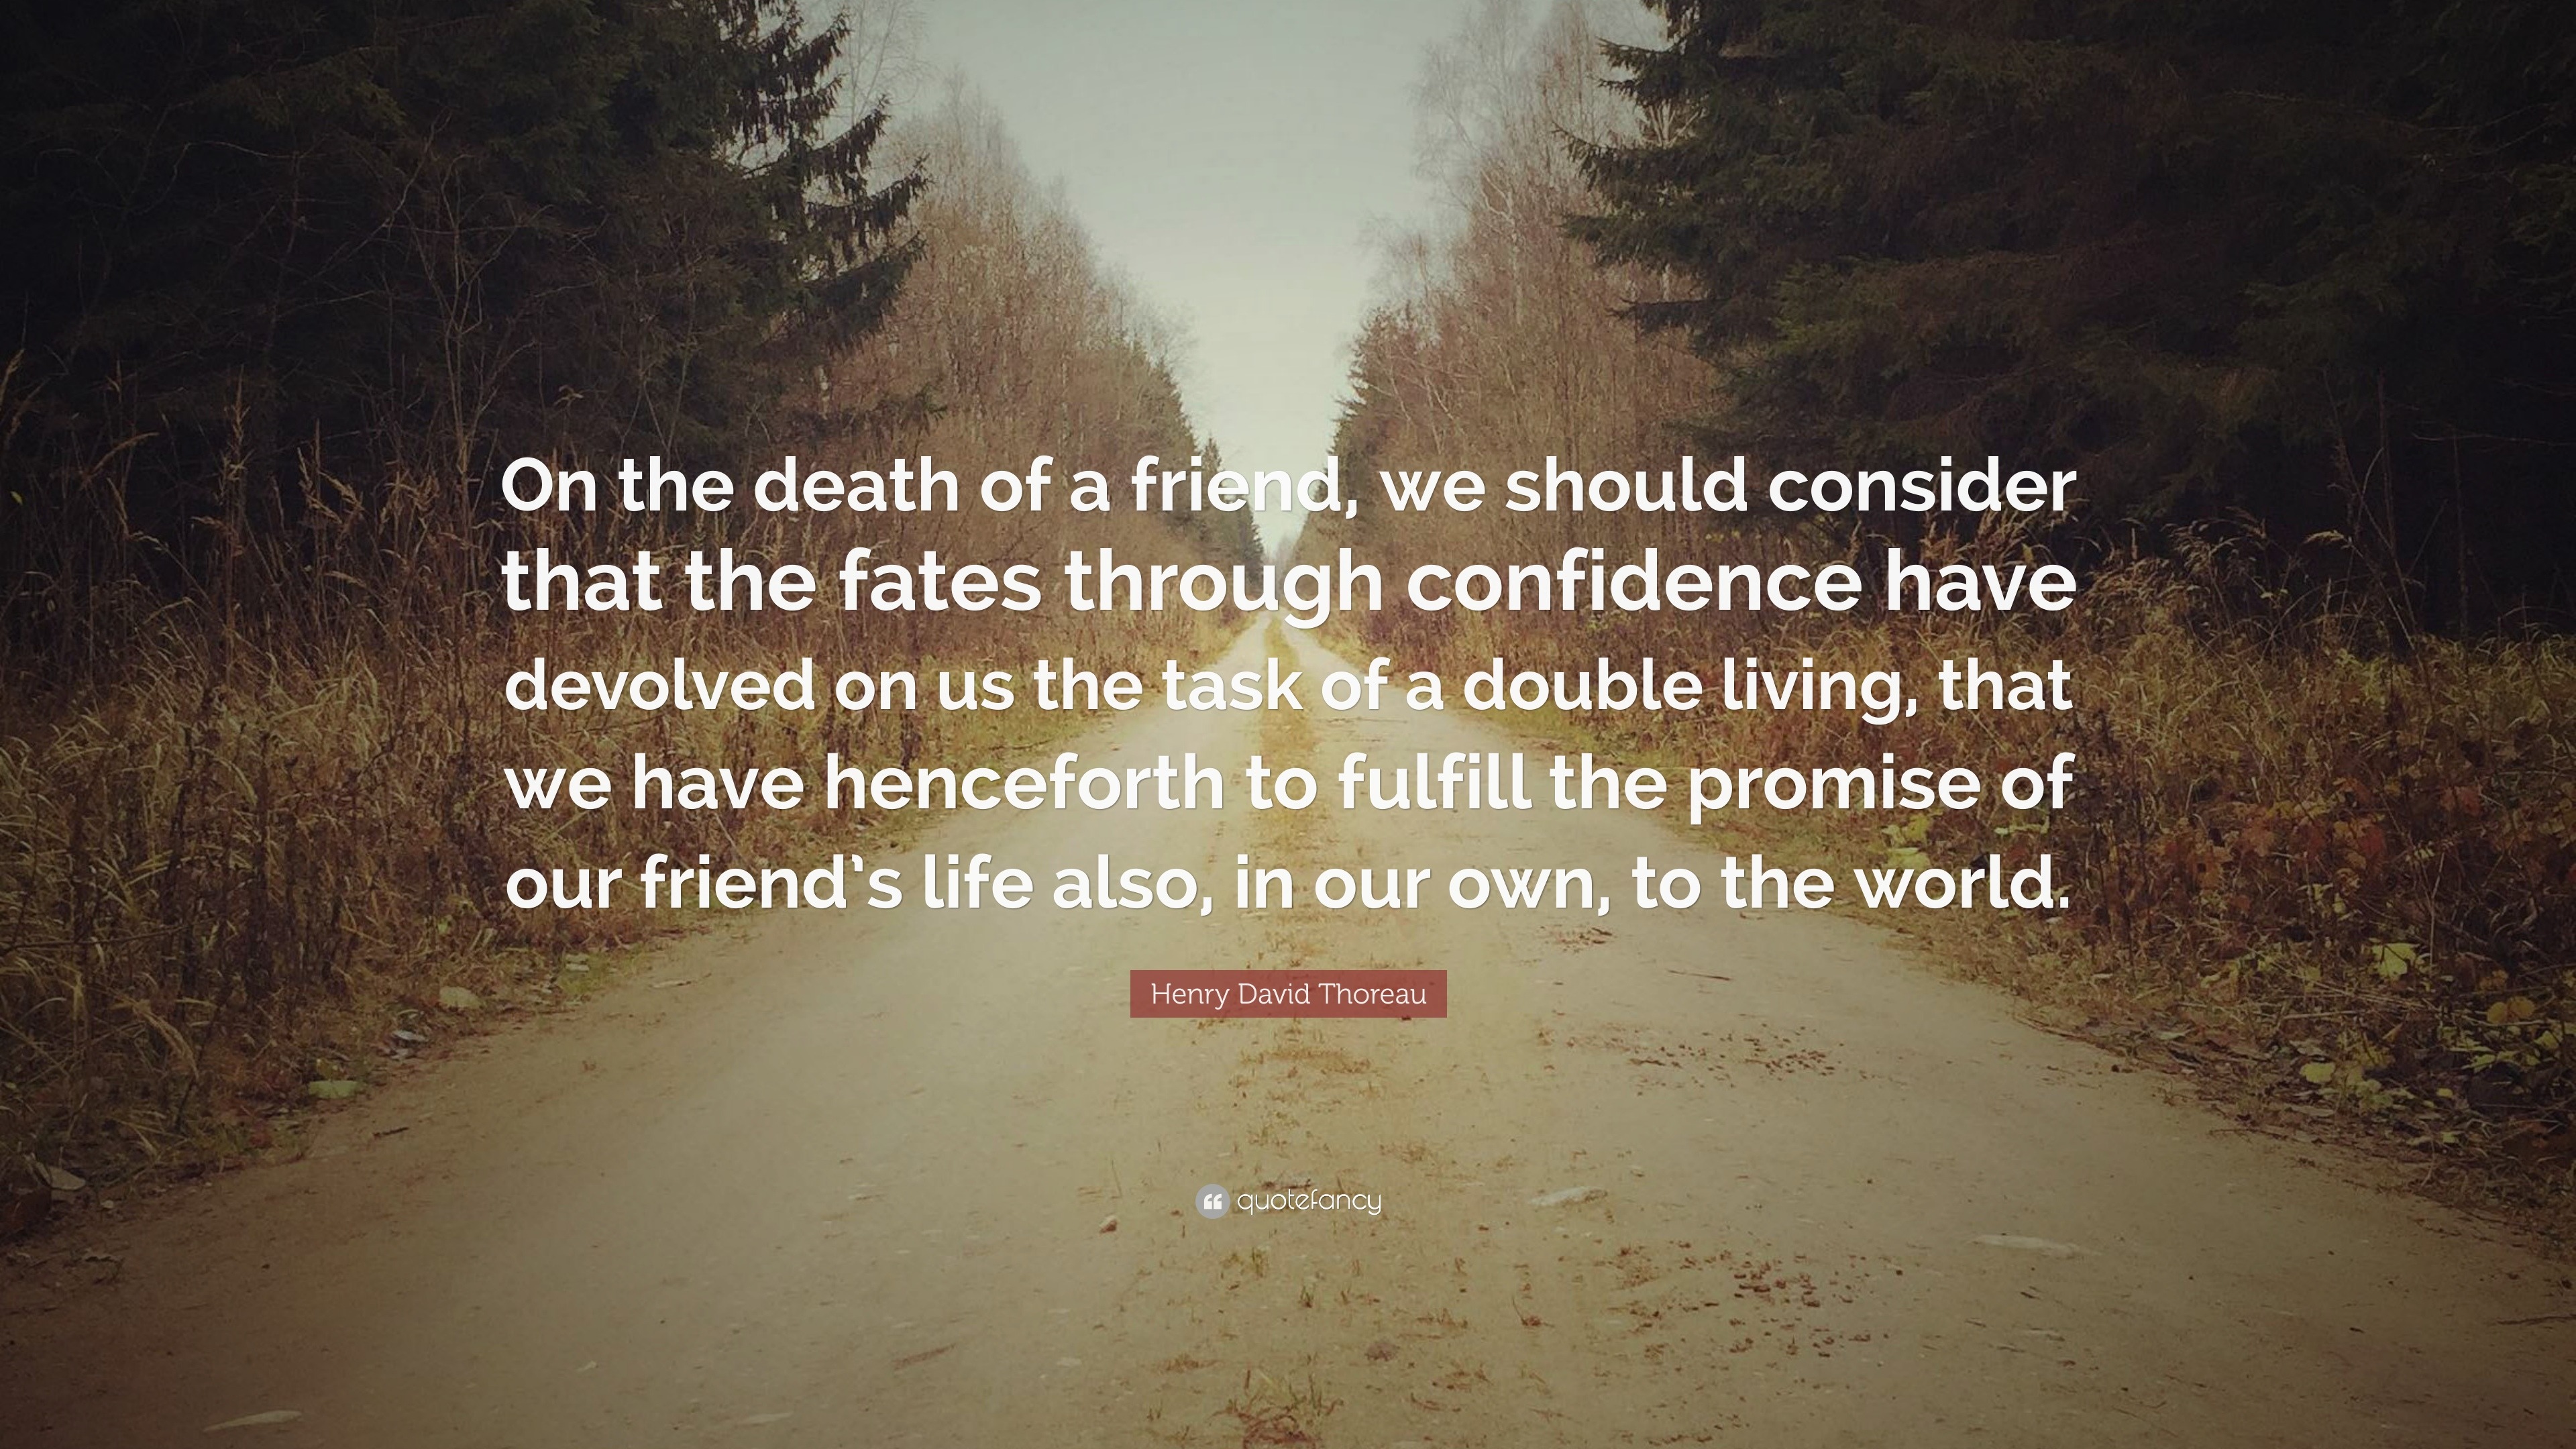 Henry David Thoreau Quote: “On the death of a friend, we should